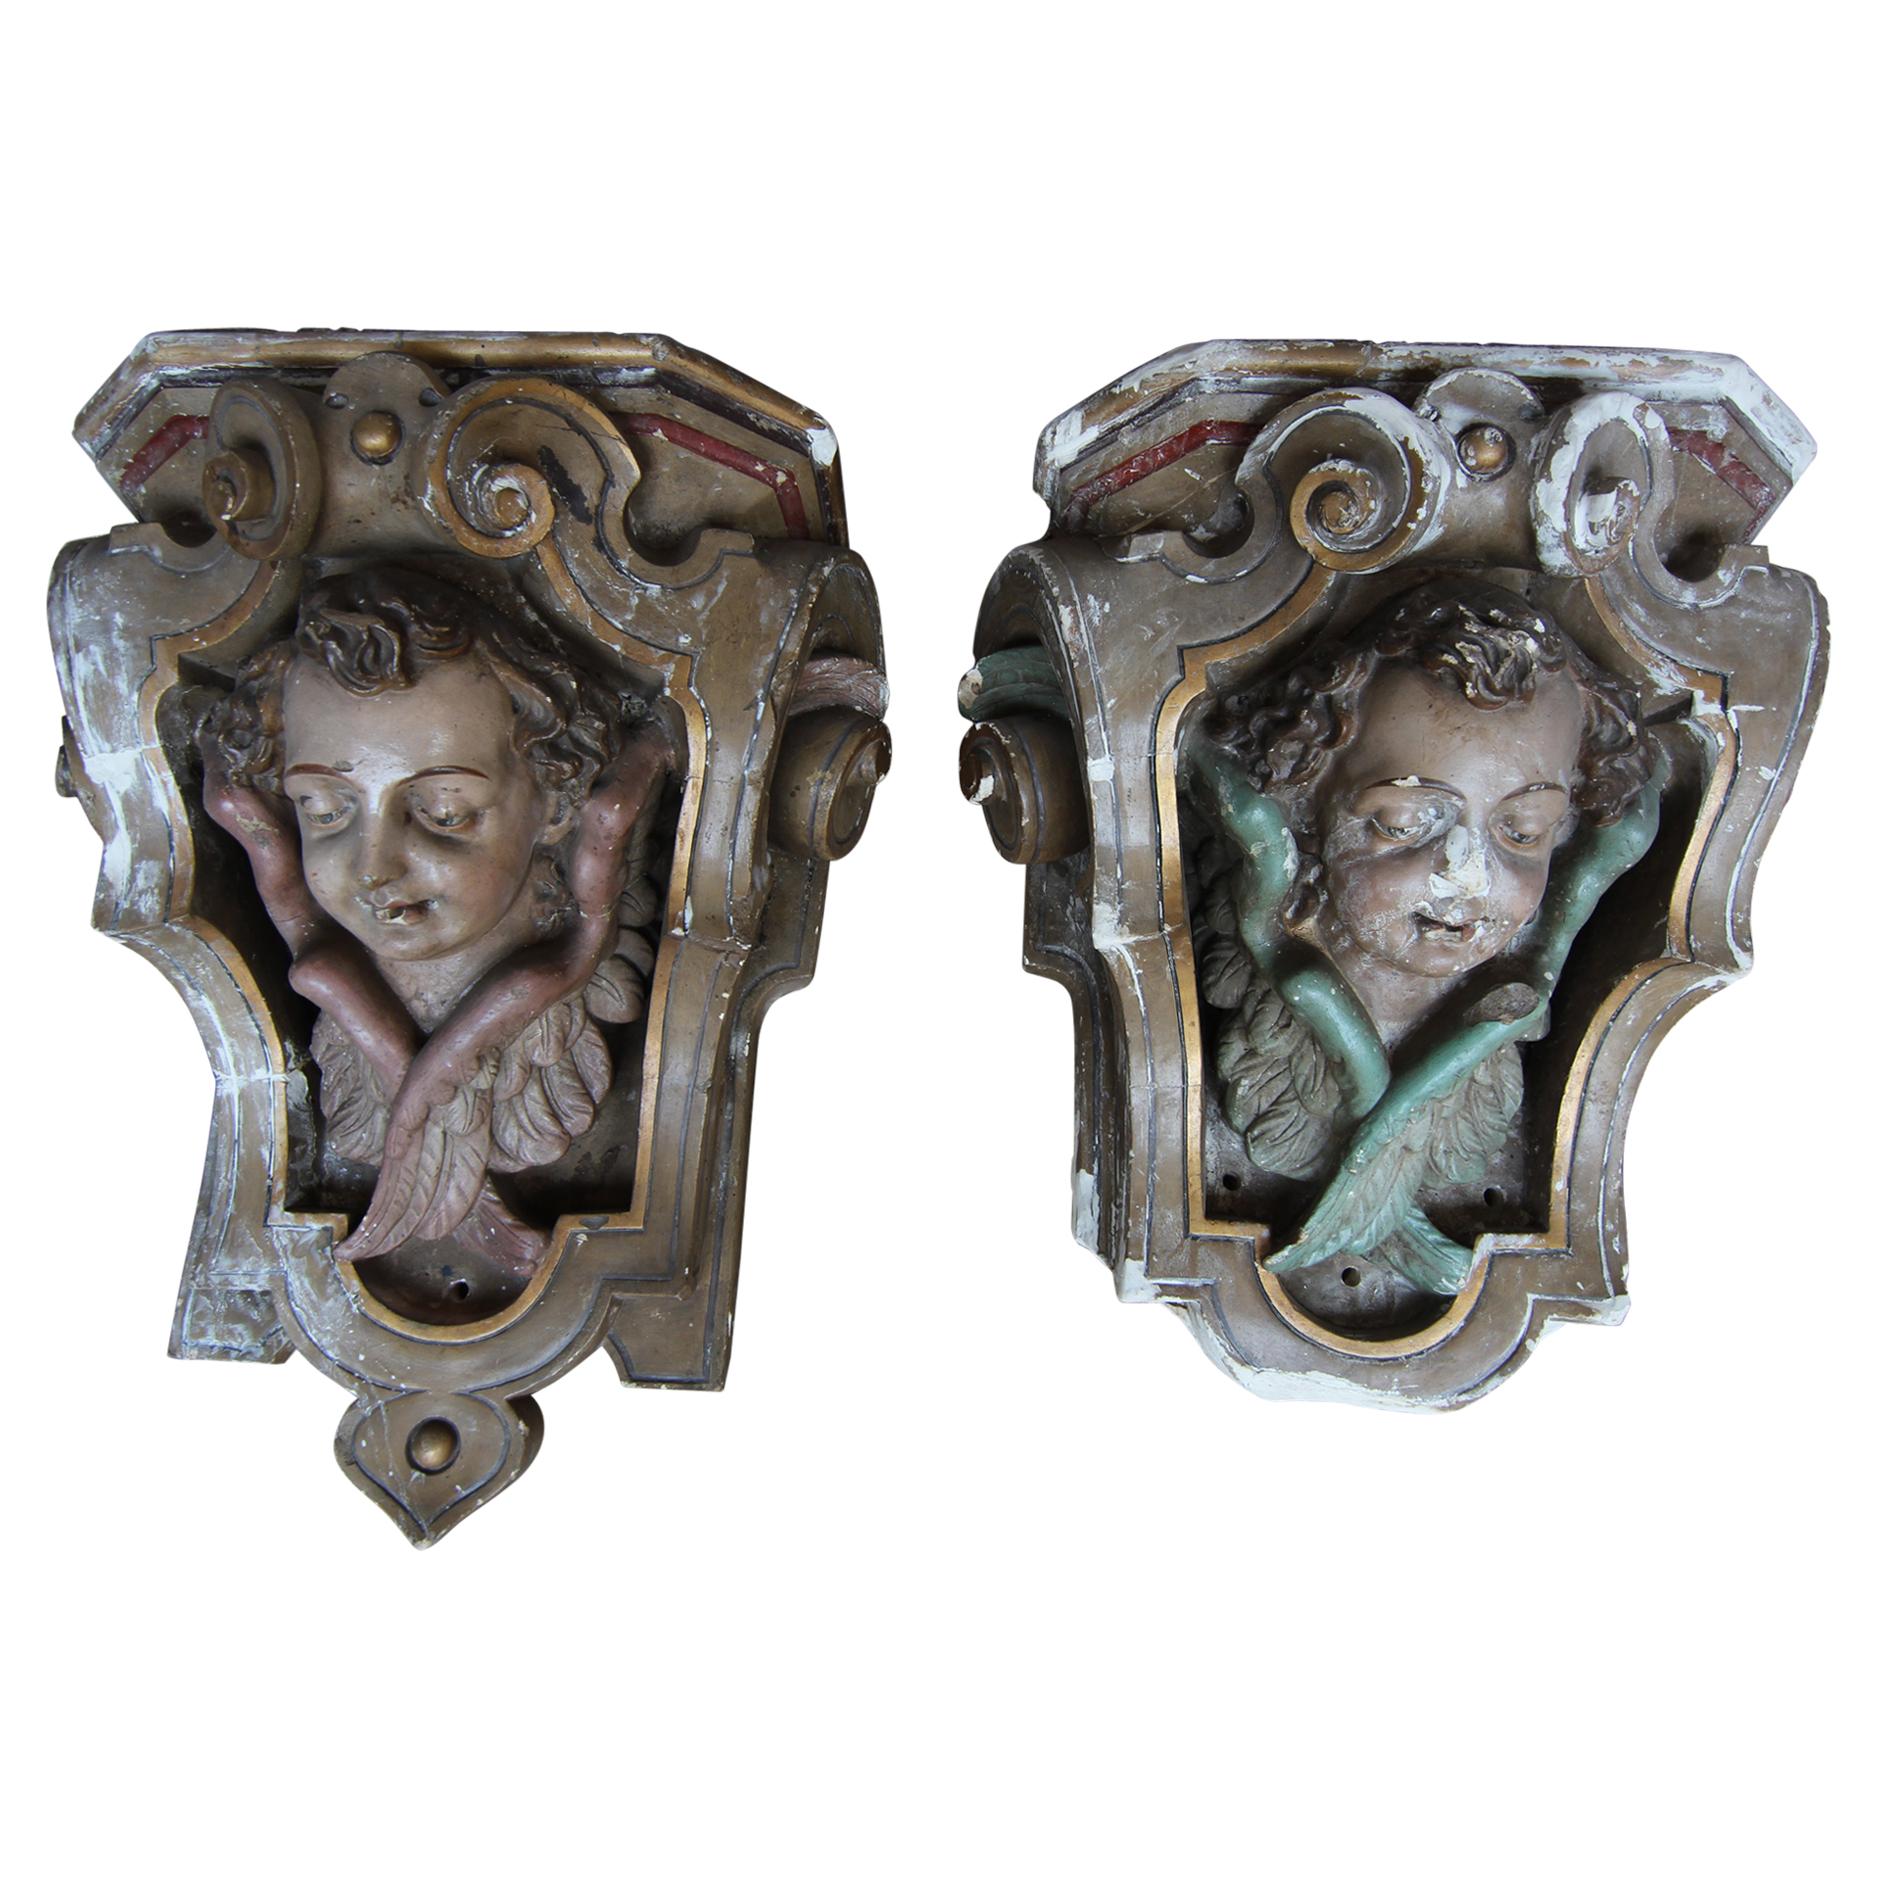 19th Century Rococo Revival Putti Wall Brackets made of Plaster, Set of 2